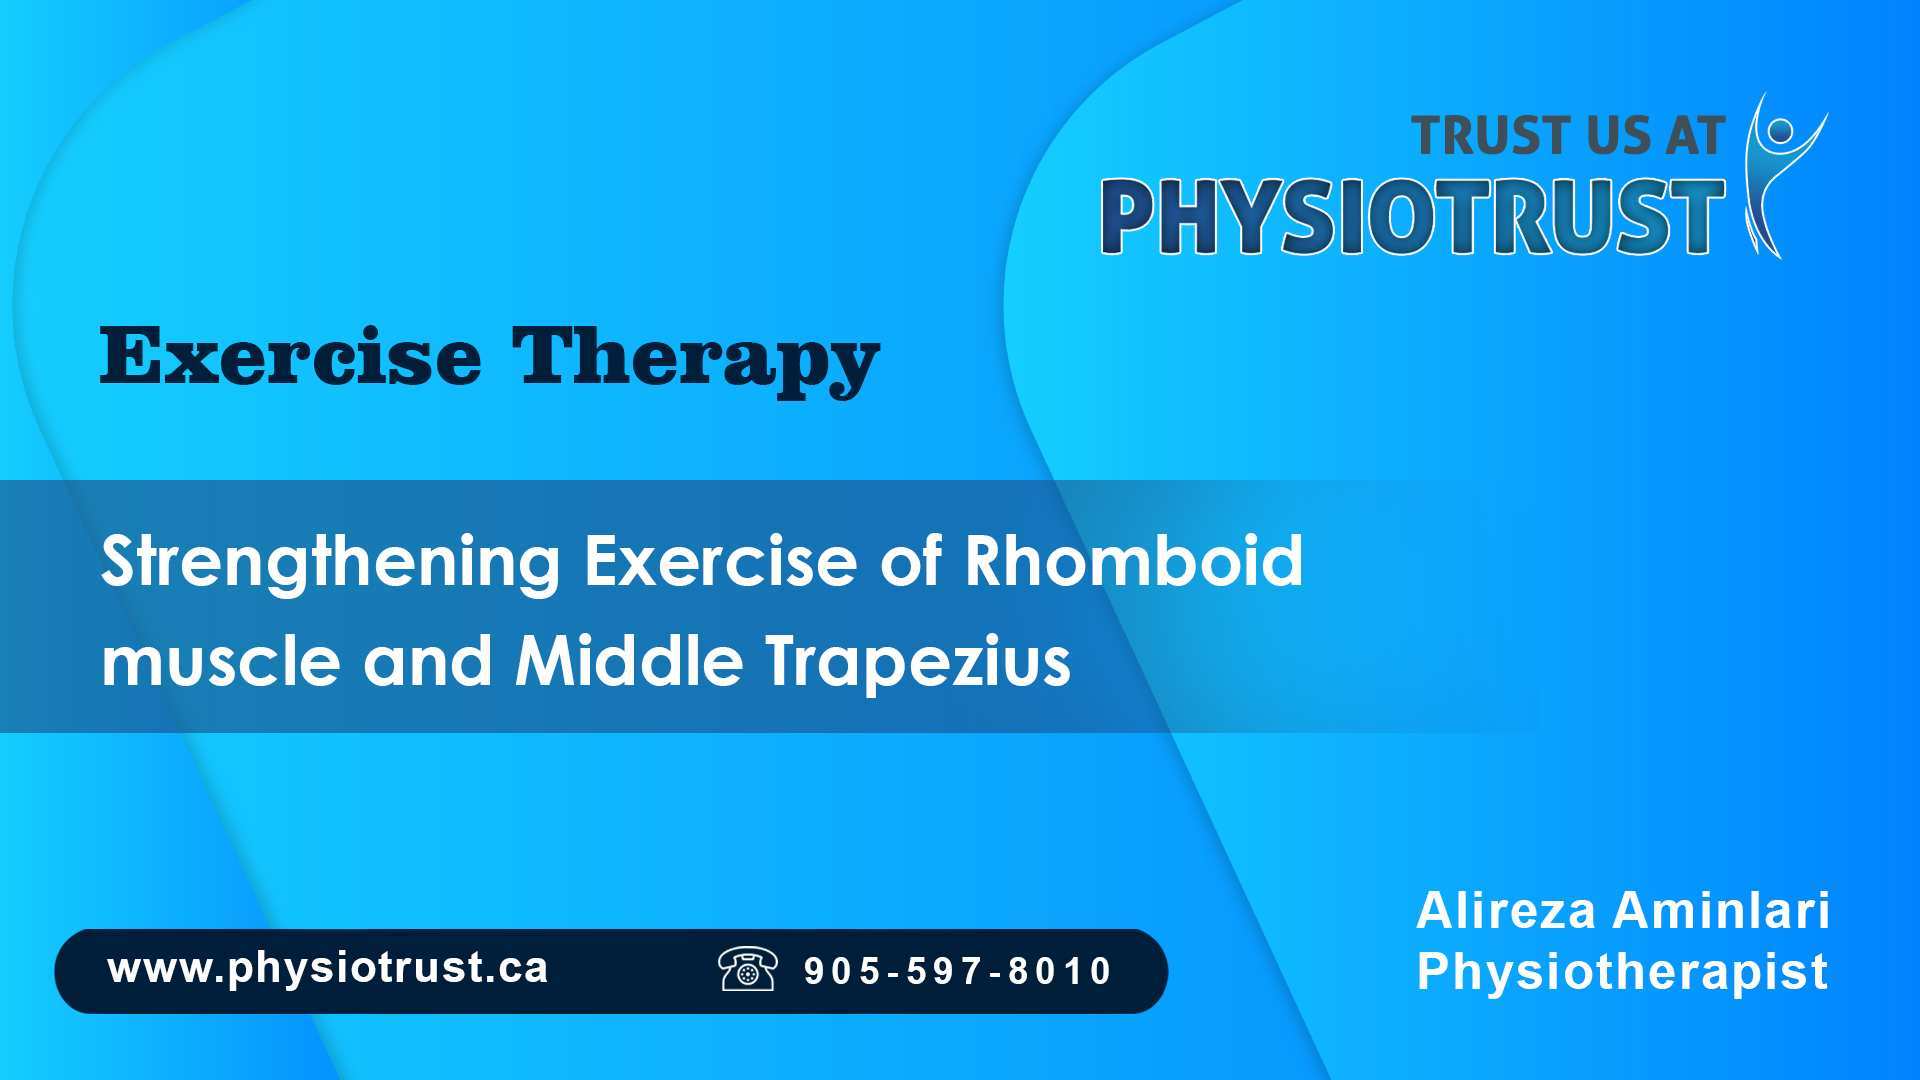 Strengthening Exercise of Rhomboid muscle and Middle Trapezius